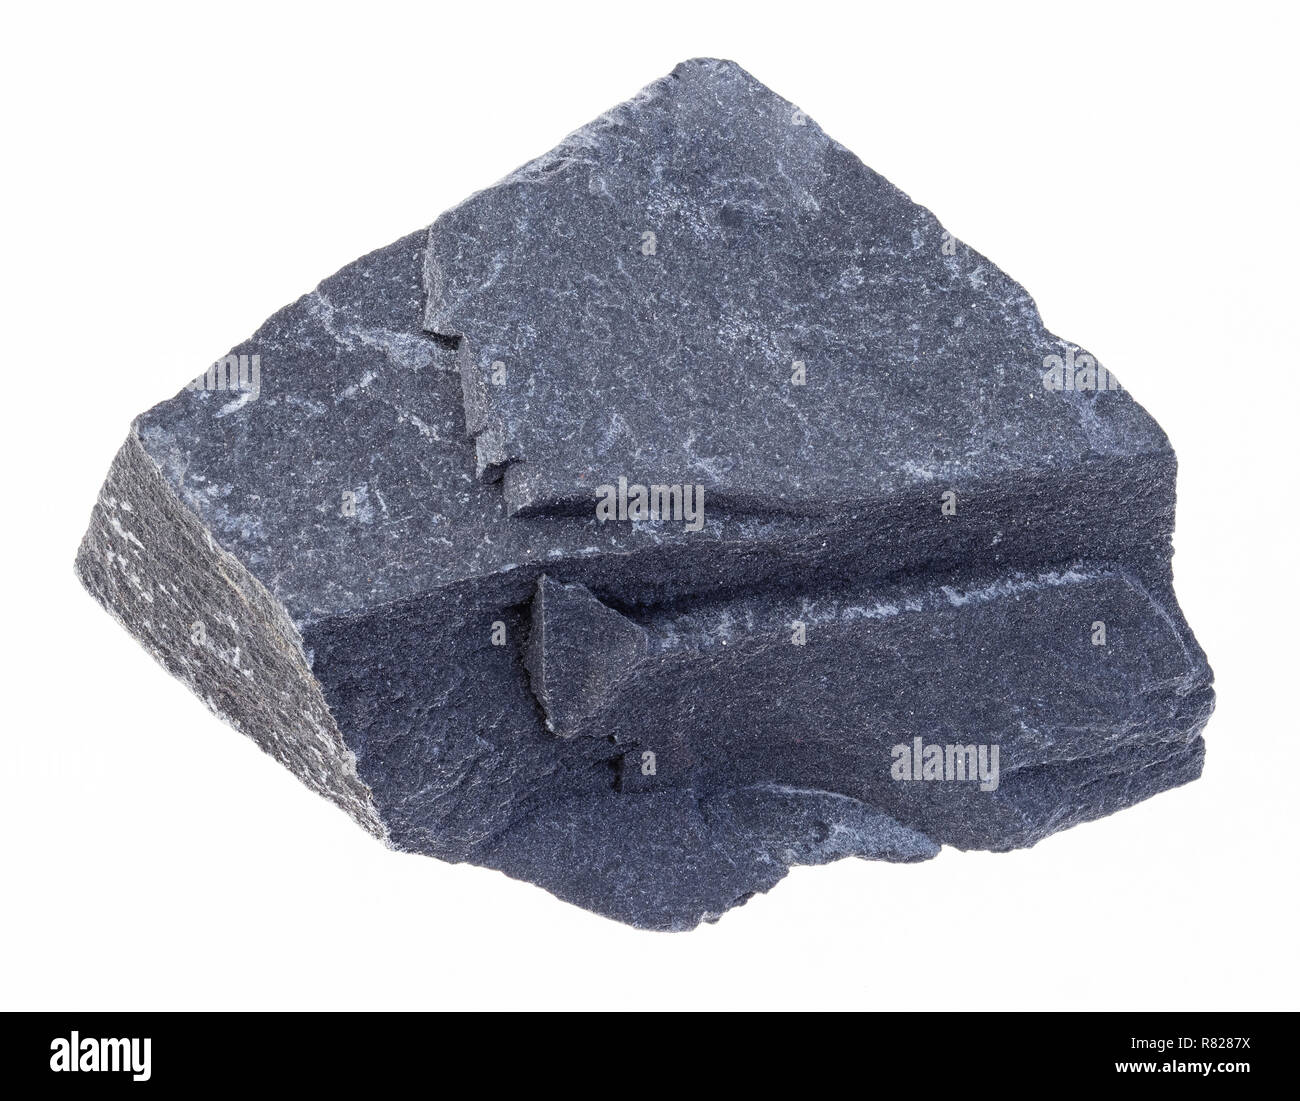 macro photography of natural mineral from geological collection - raw black argillite stone (mudstone) on white background Stock Photo